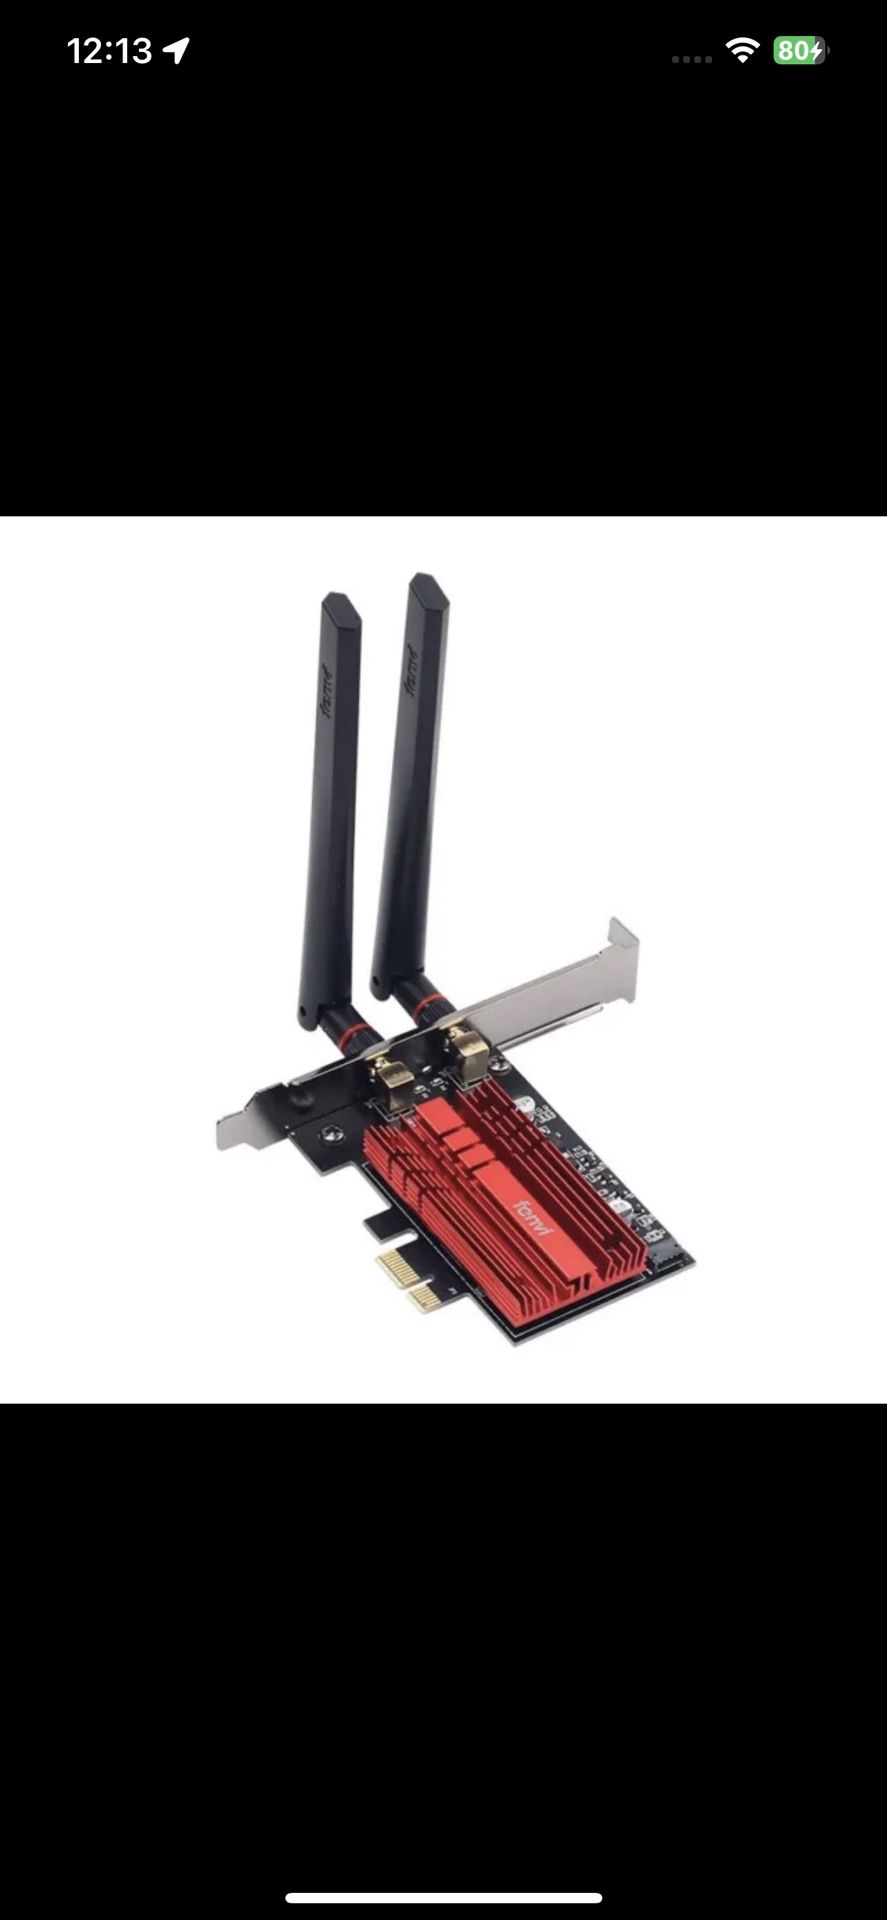 WIFI 6E and Bluetooth Capable PCIE Card/Adapter